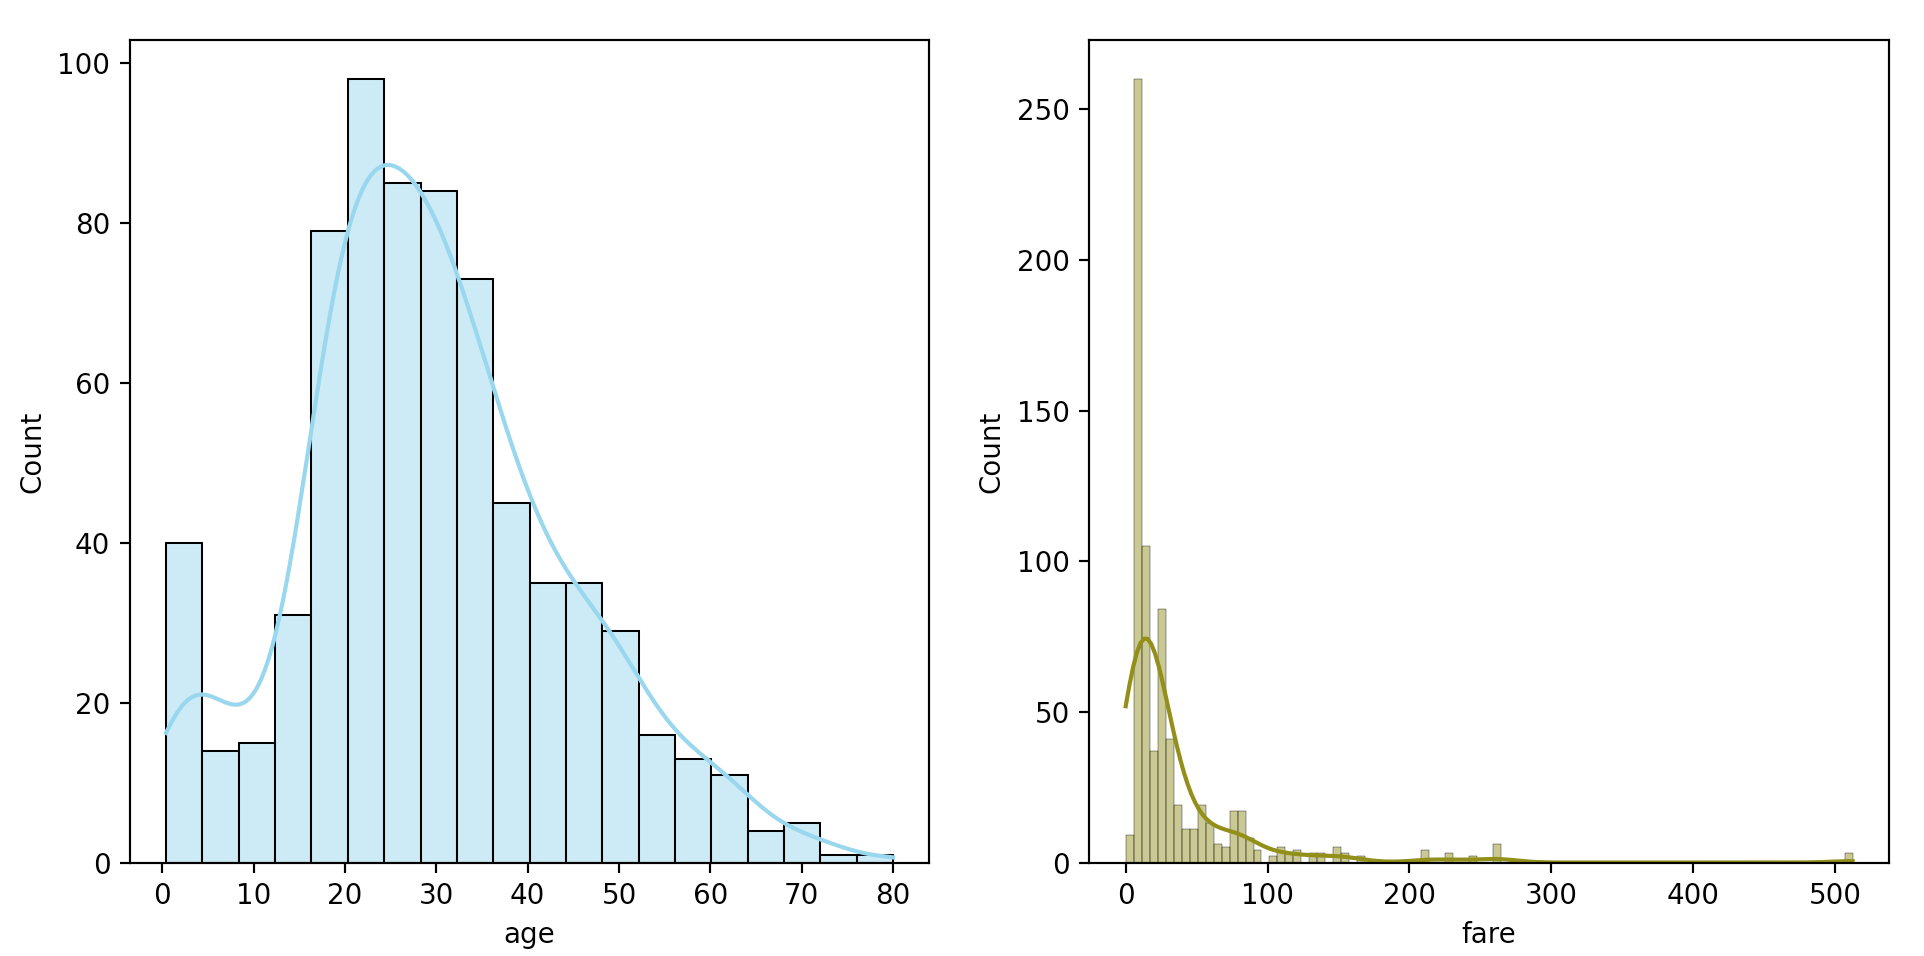 2021-02-07-linear-discriminant-analysis-002-fig-1.png